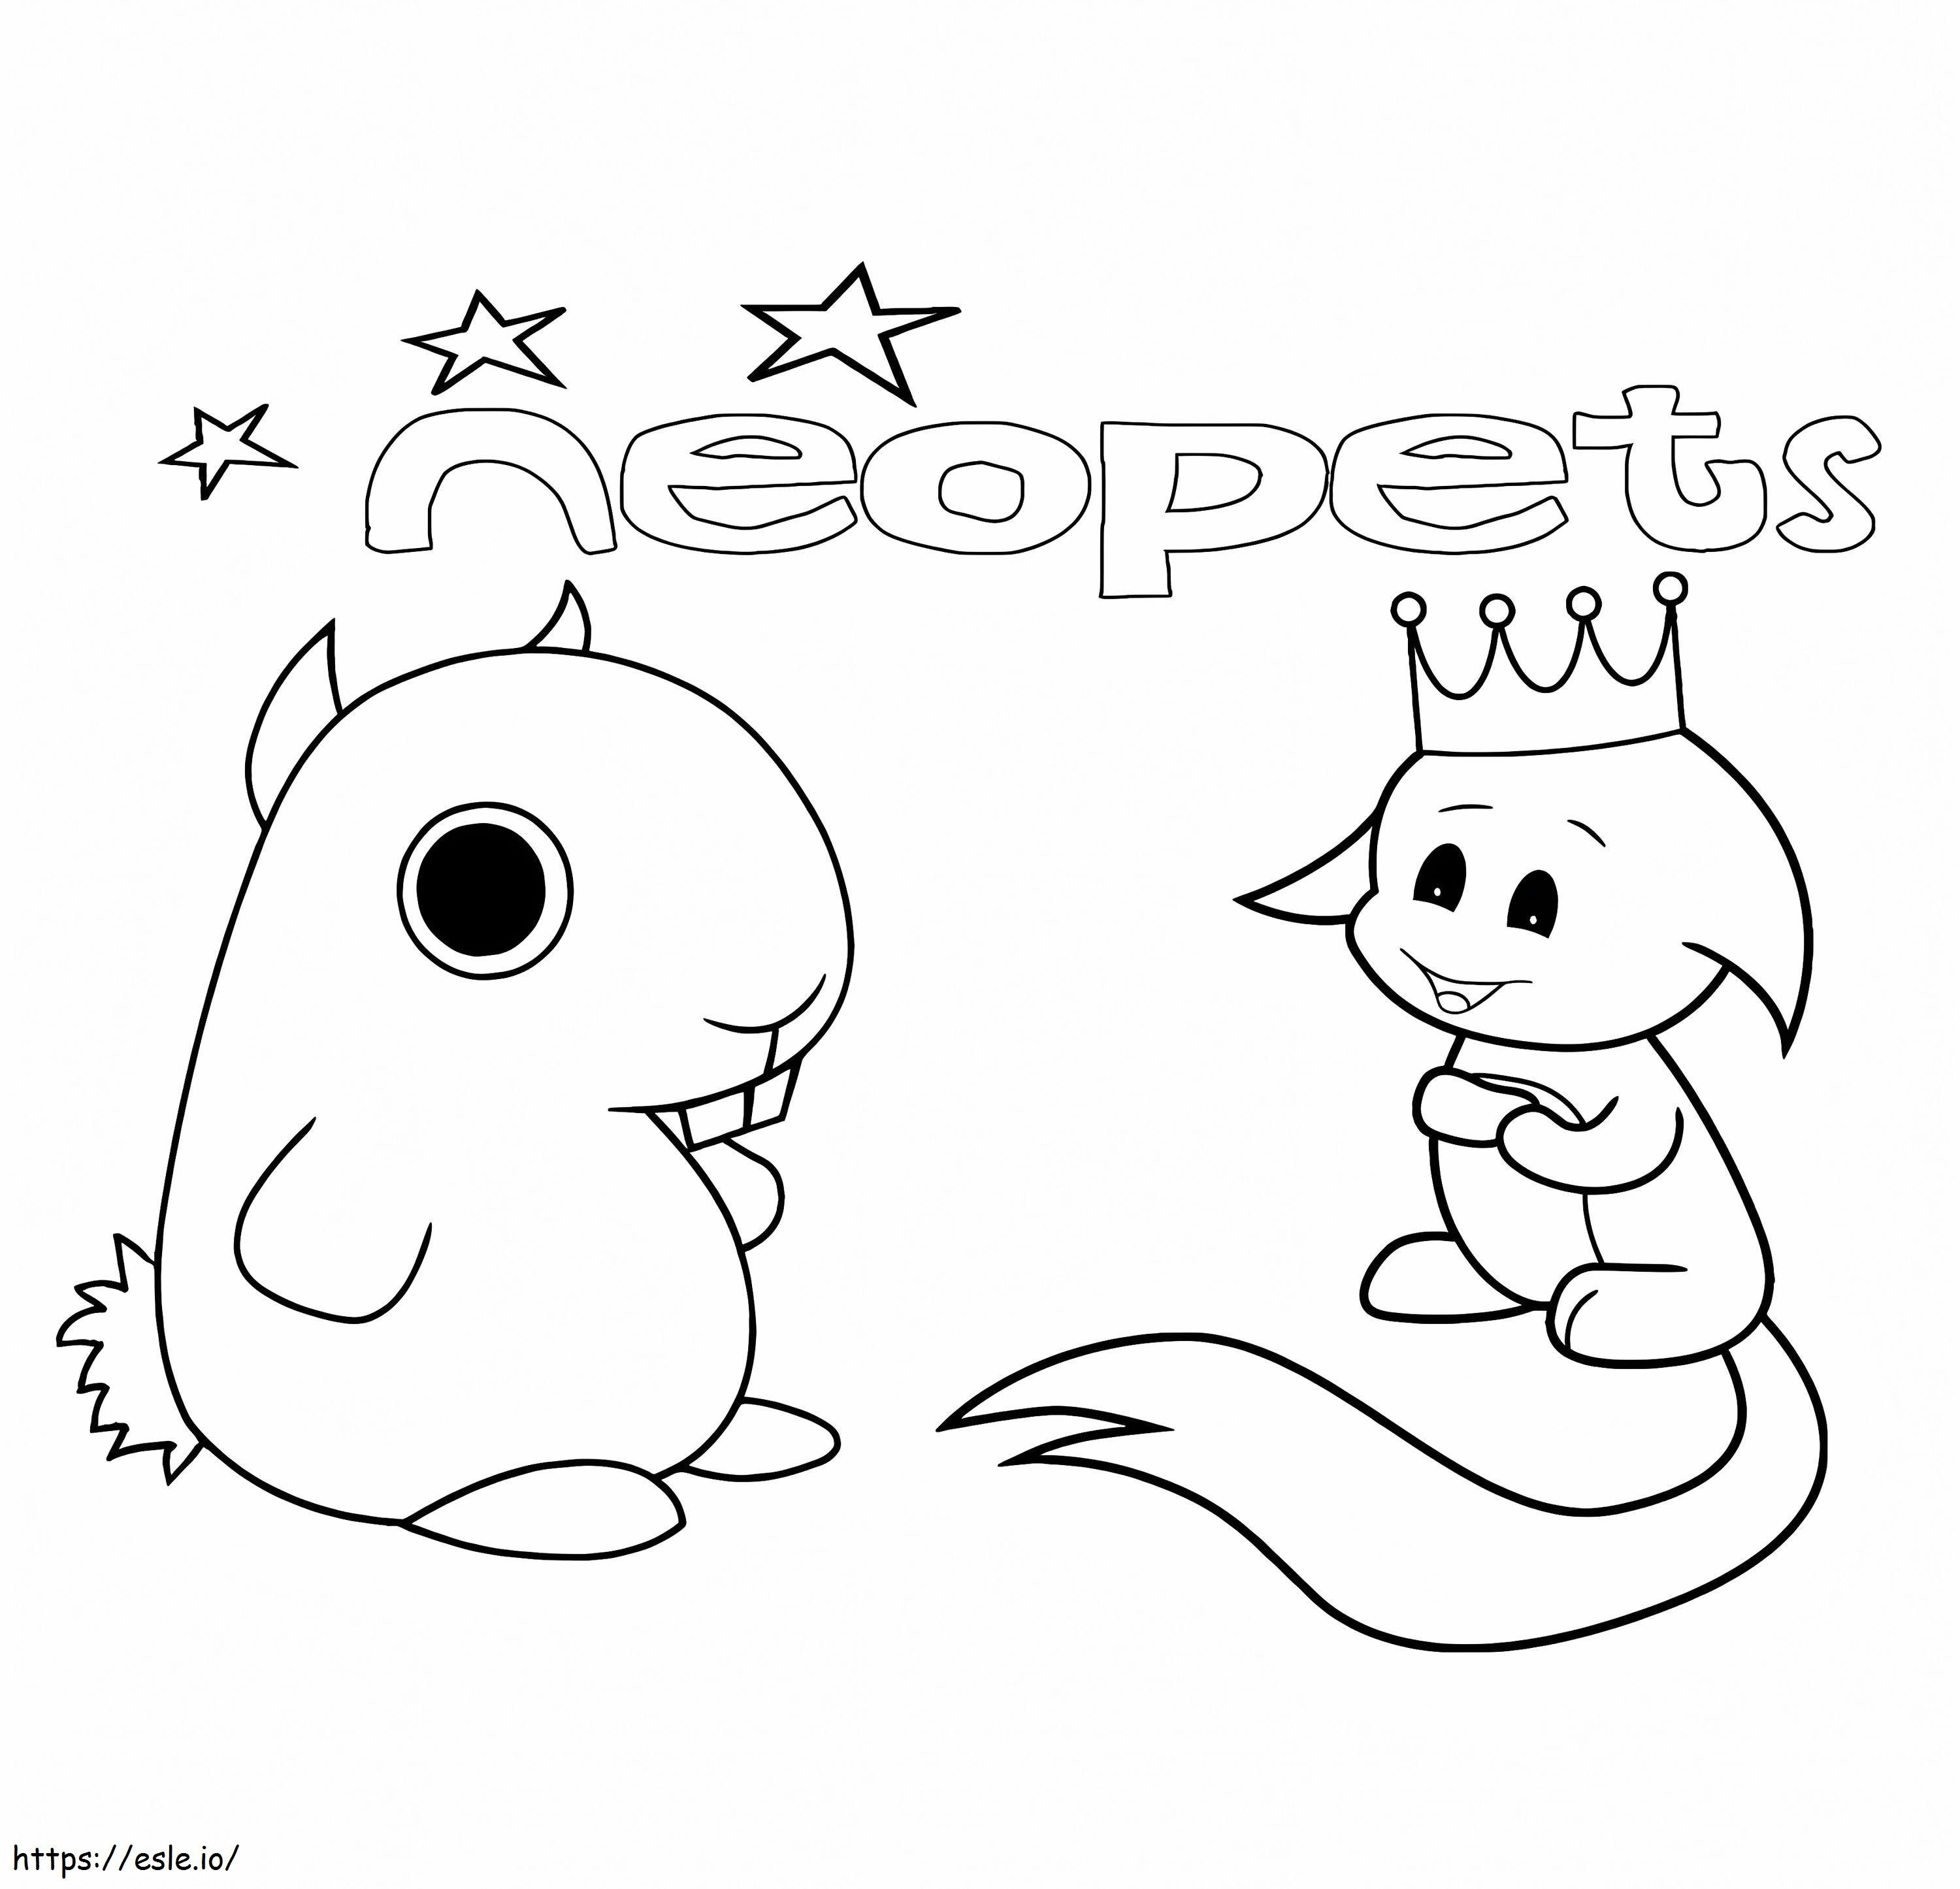 Neopets 13 coloring page